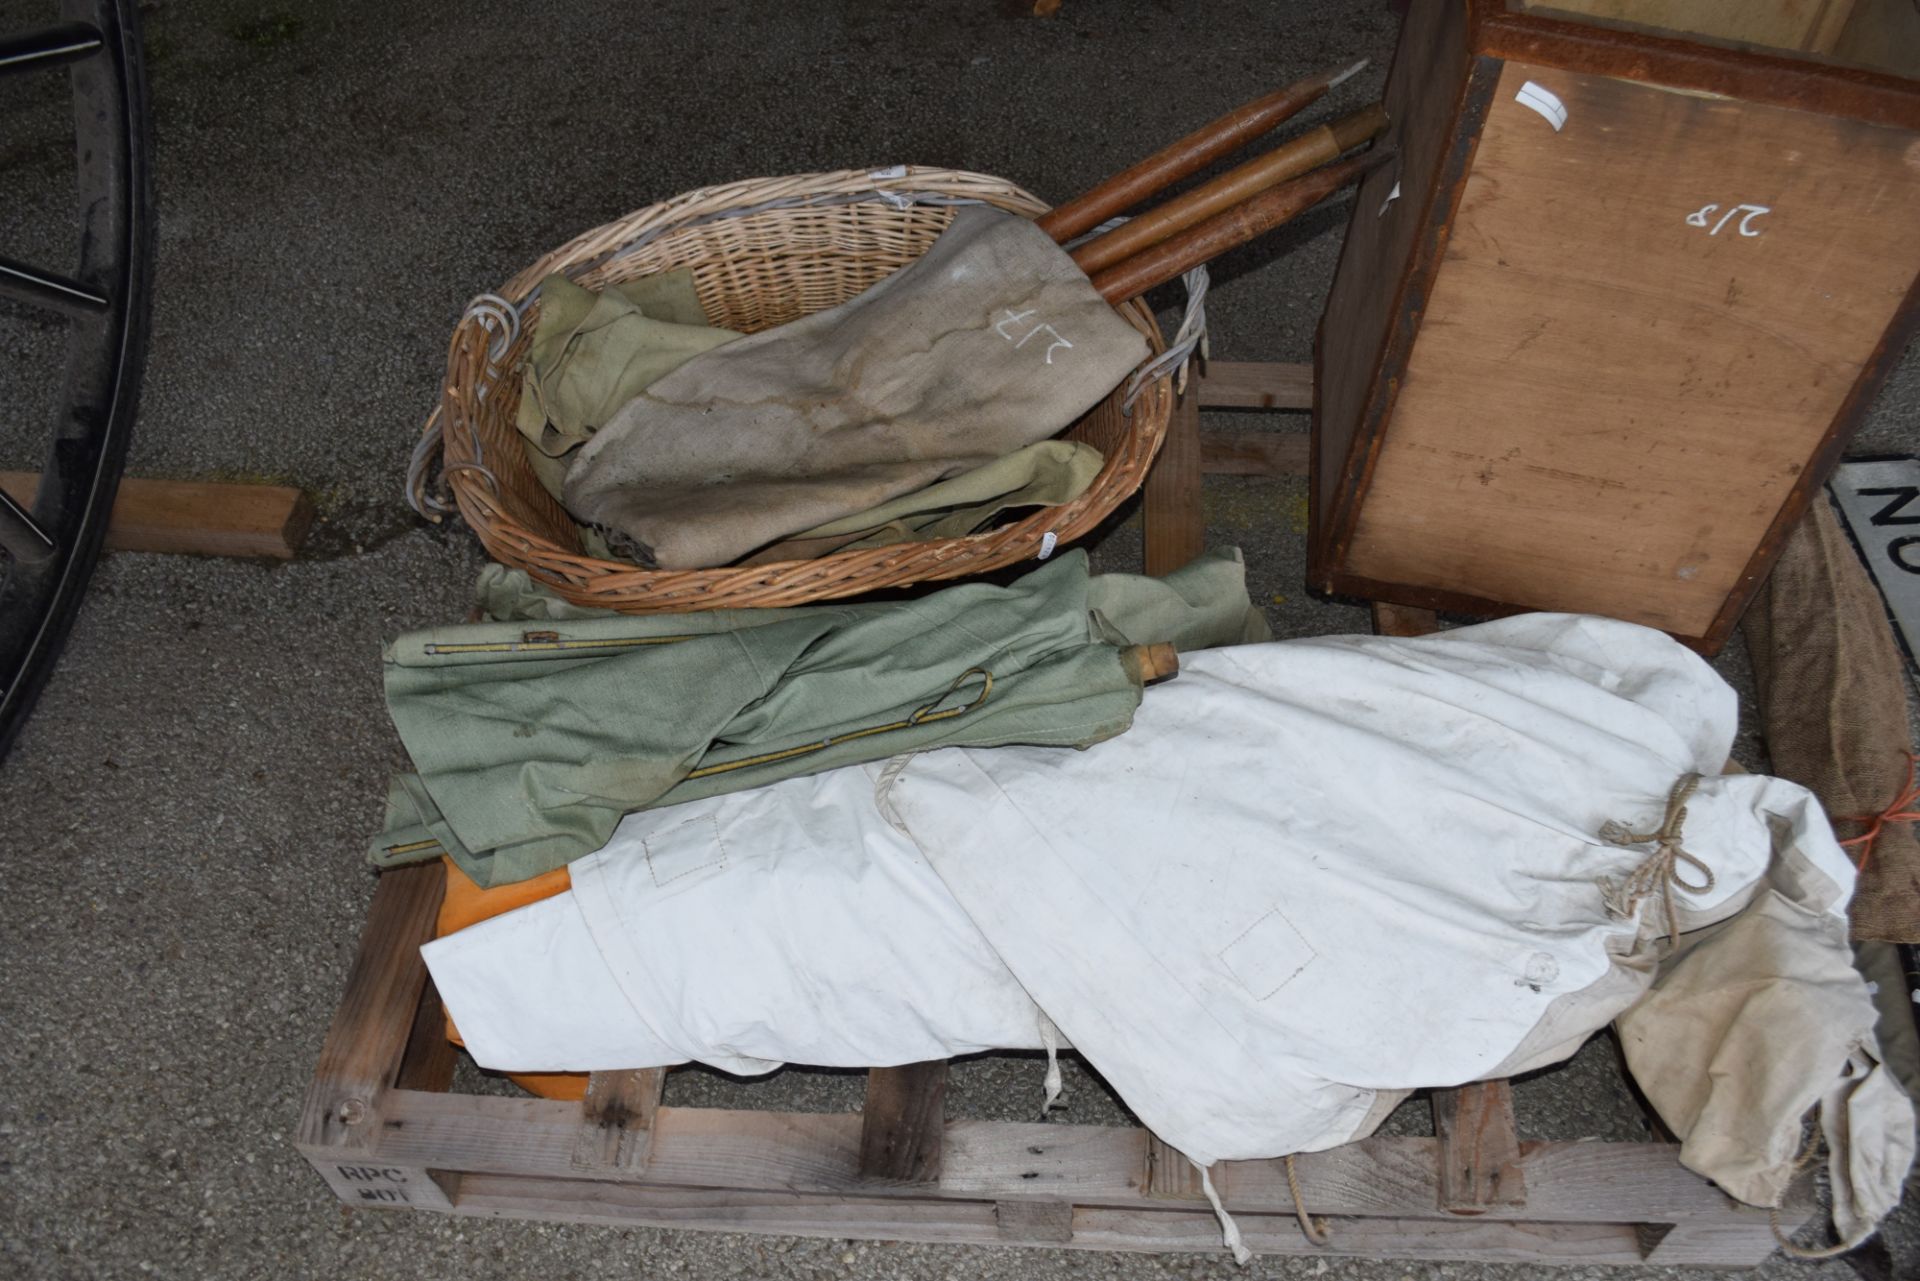 Quantity of canvas tarps and a wicker basket